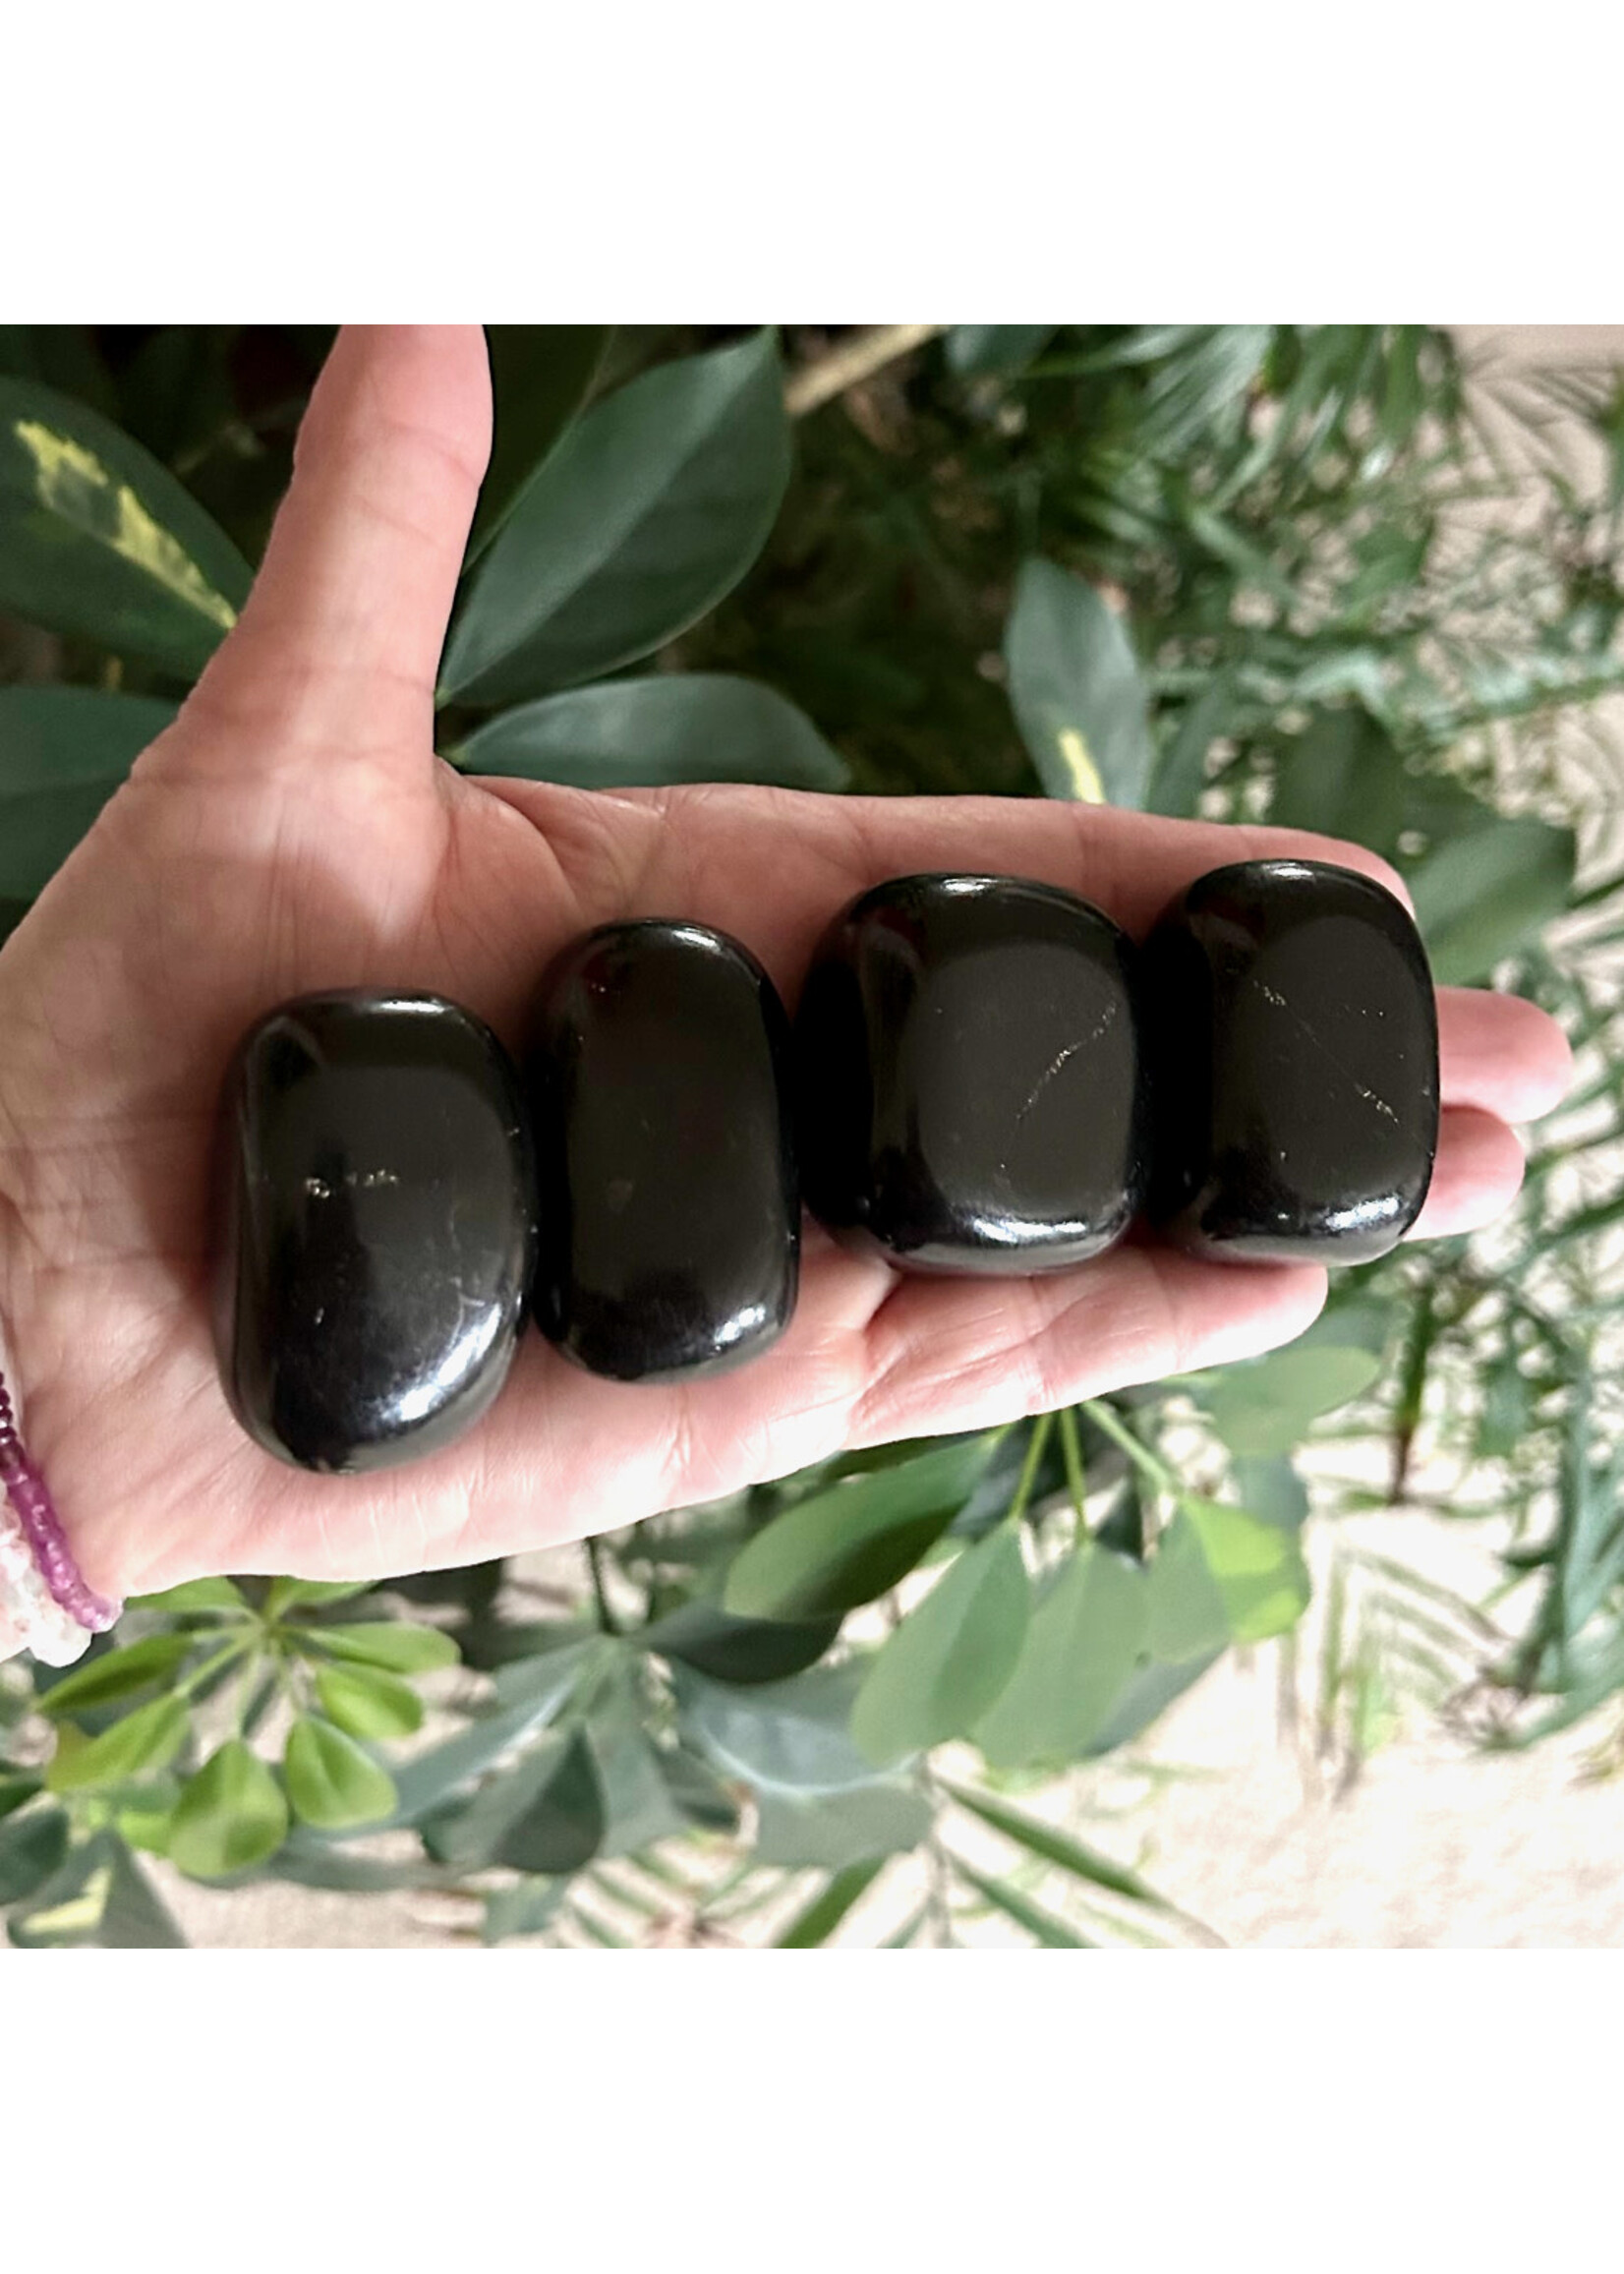 Shungite Polished for energetic clearing